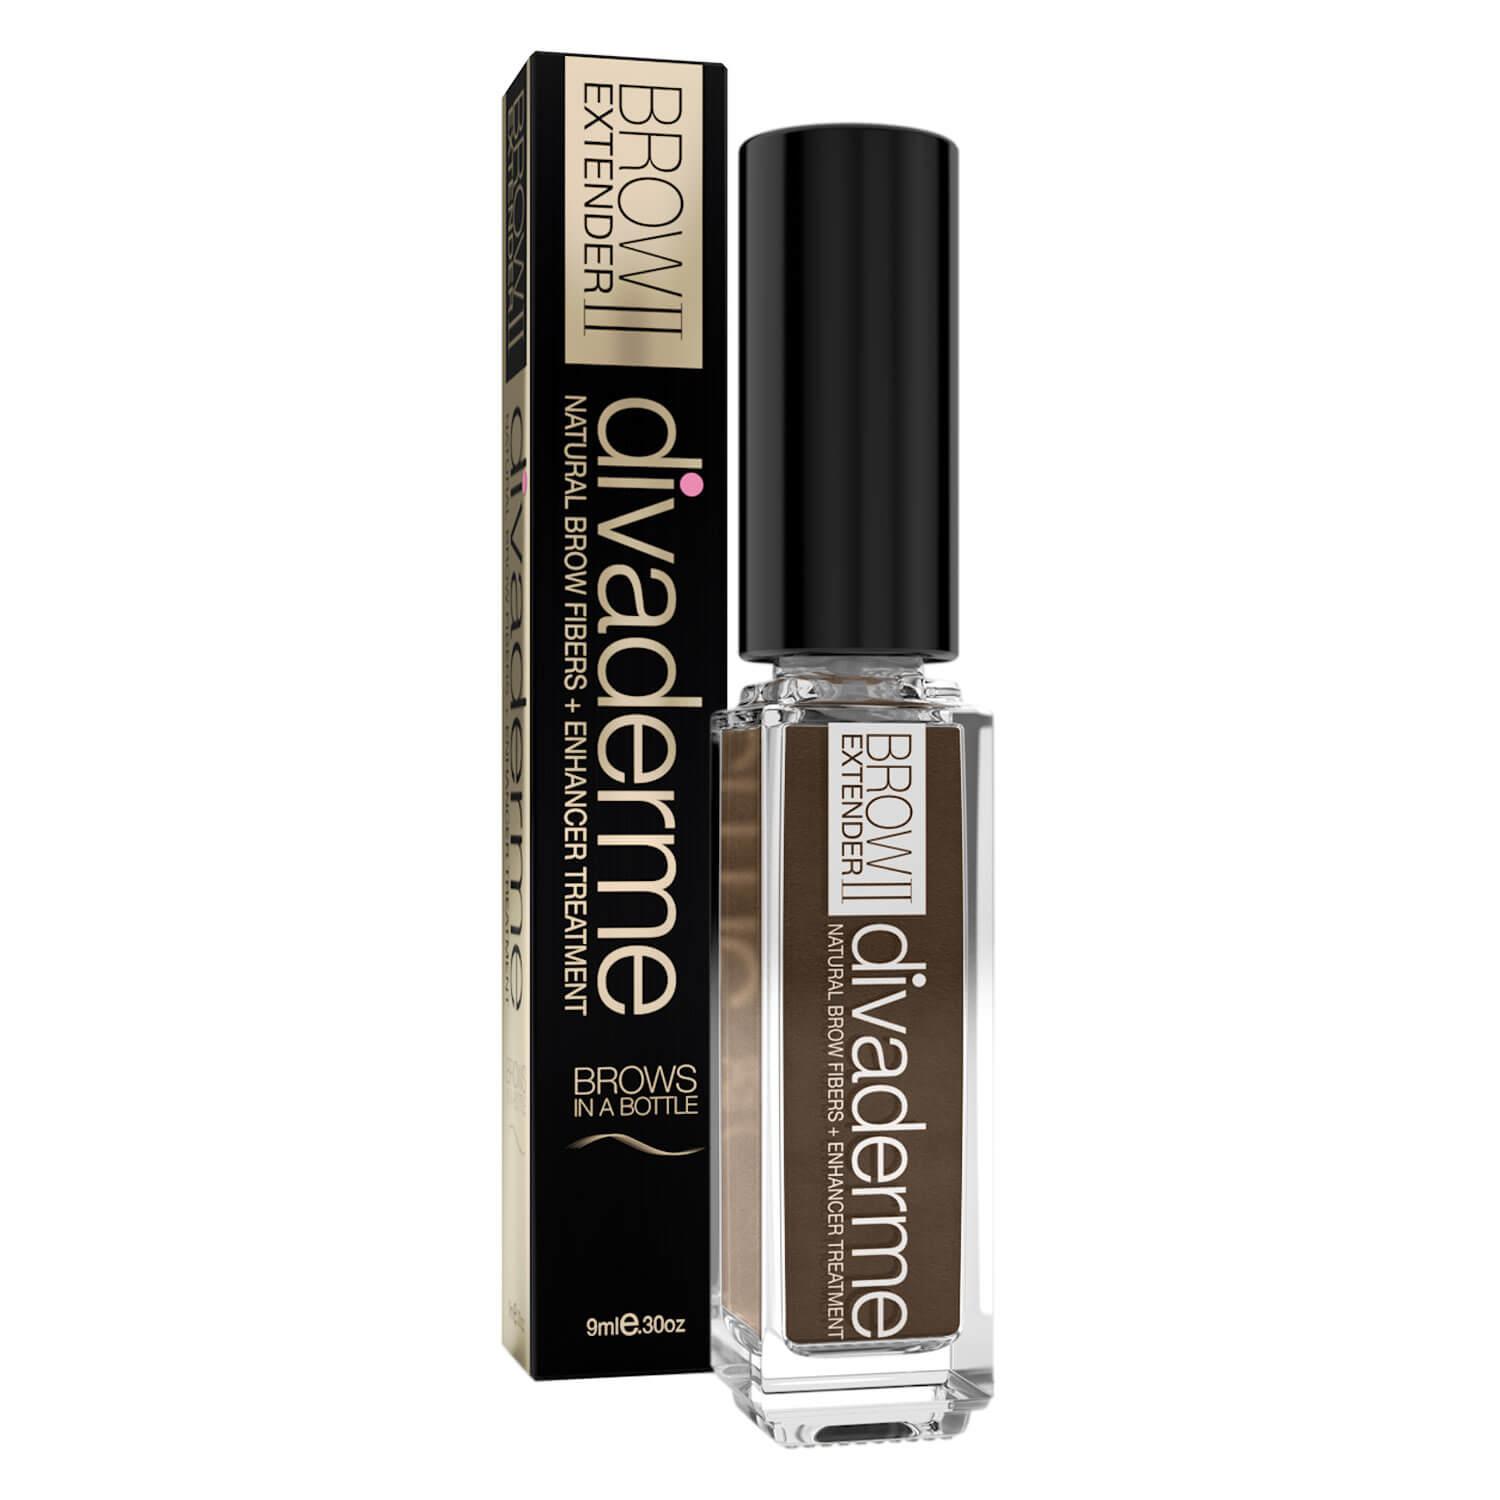 Divaderme - Brow Extender II Cappuccino Brown